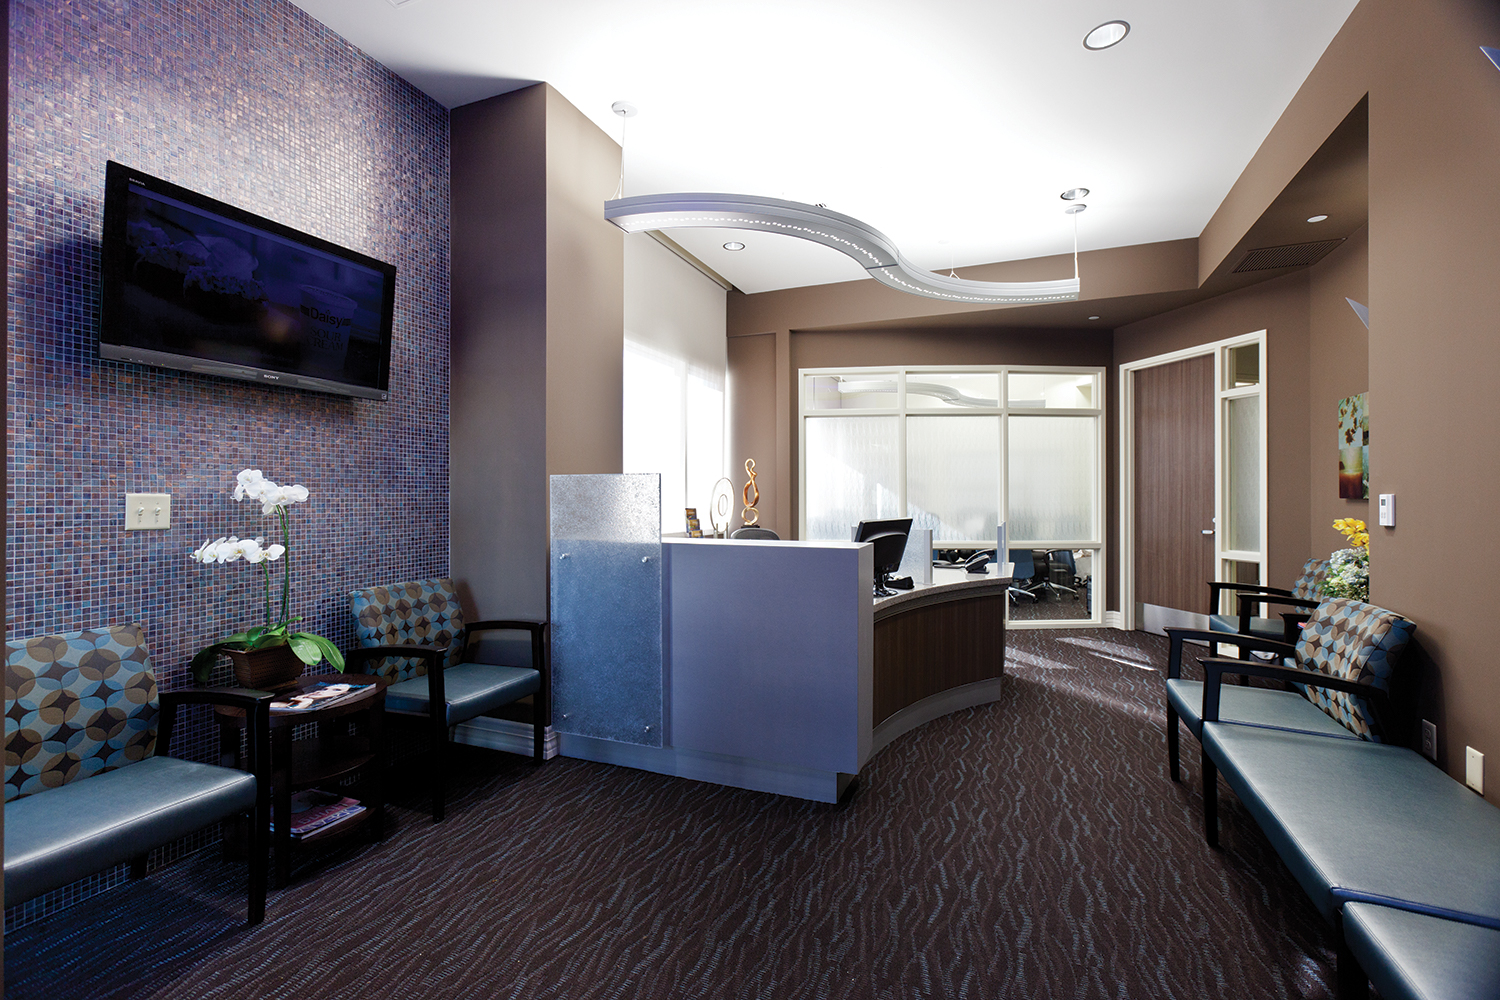 Infinity Performance in healthcare design above clinic reception desk.